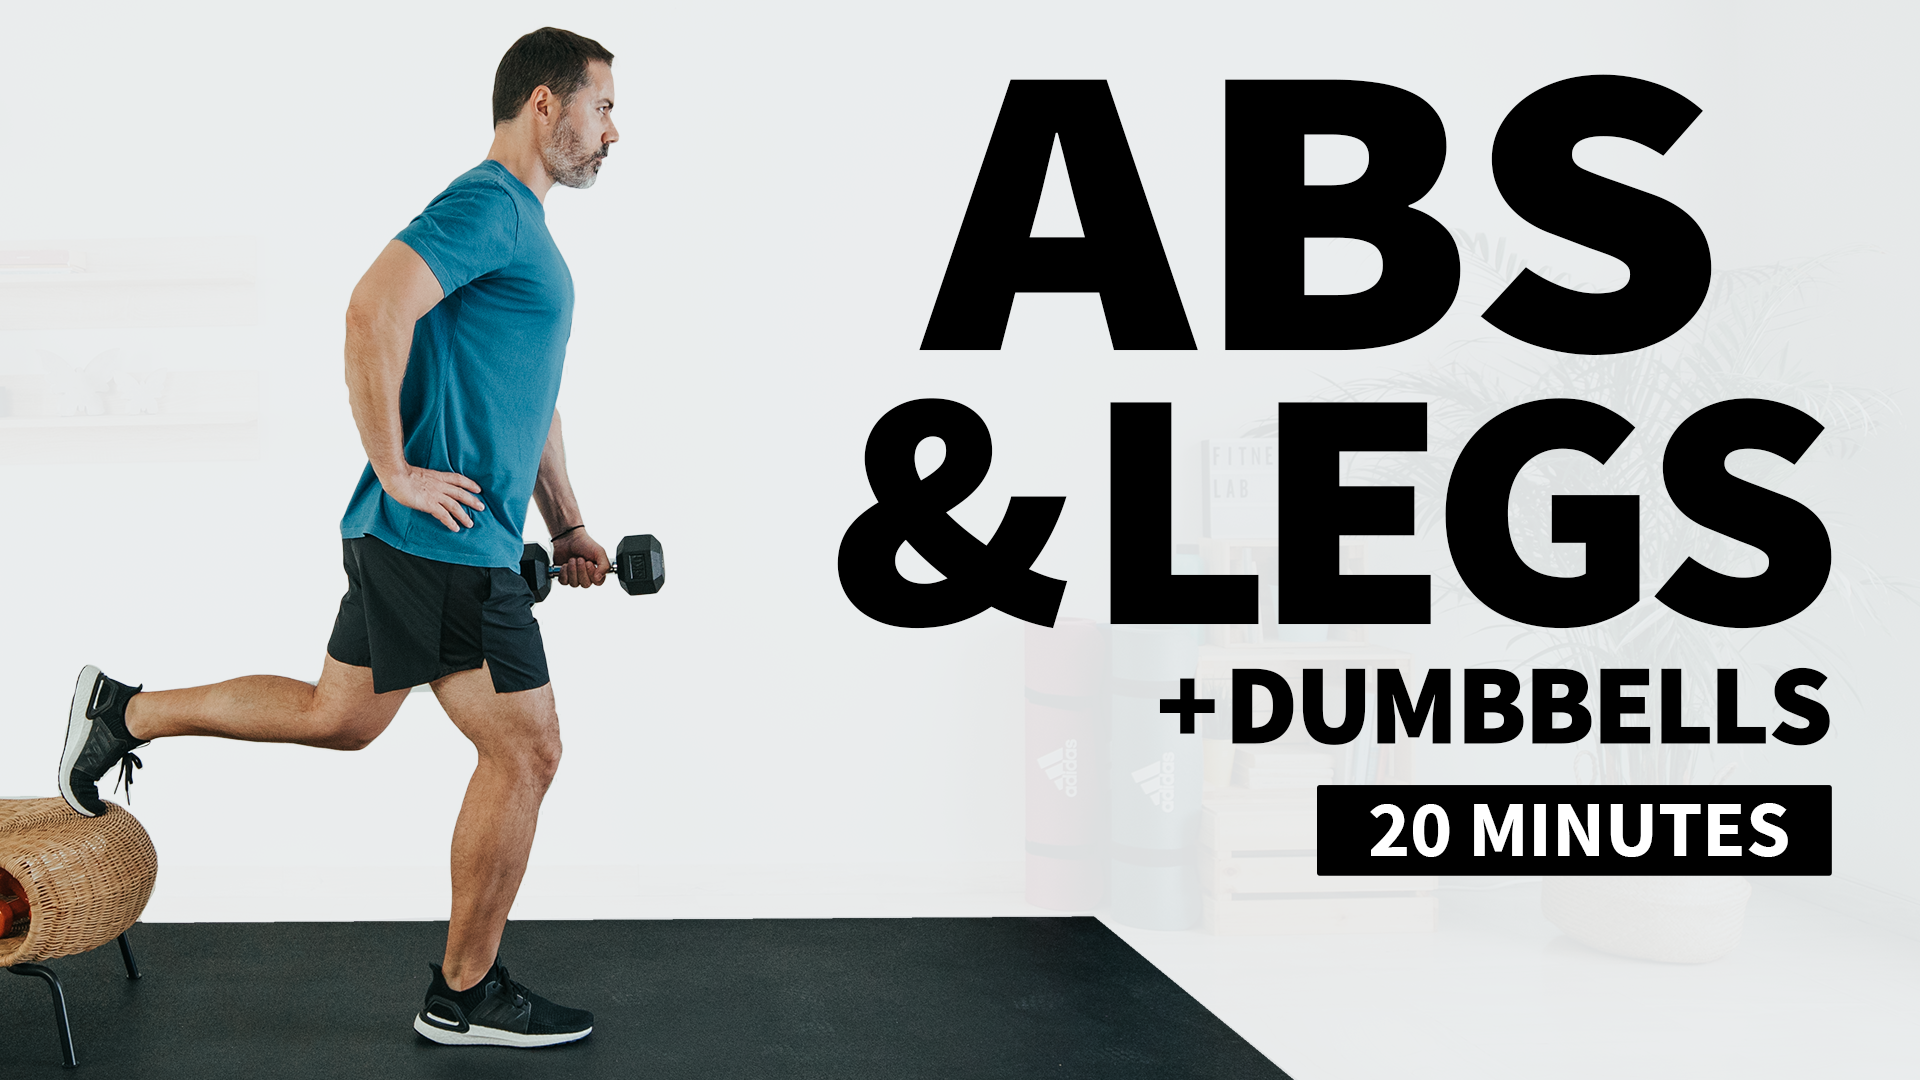 Do This Everyday To Workout Abs & Legs // Equipment: Dumbbells